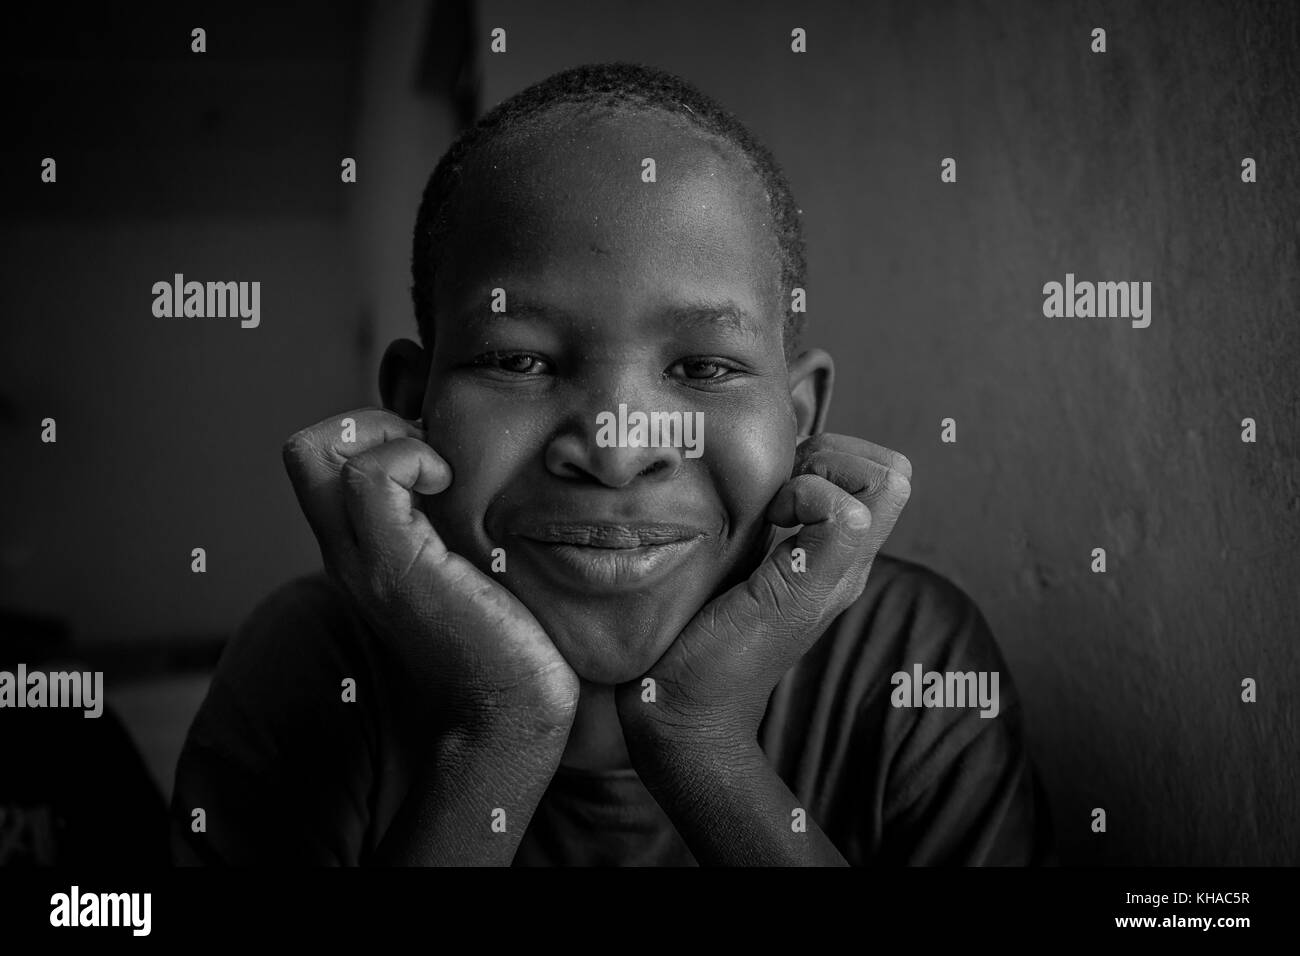 African Boy smiling with his hands under his chin looking towards the camera. Taken in Mali. Stock Photo